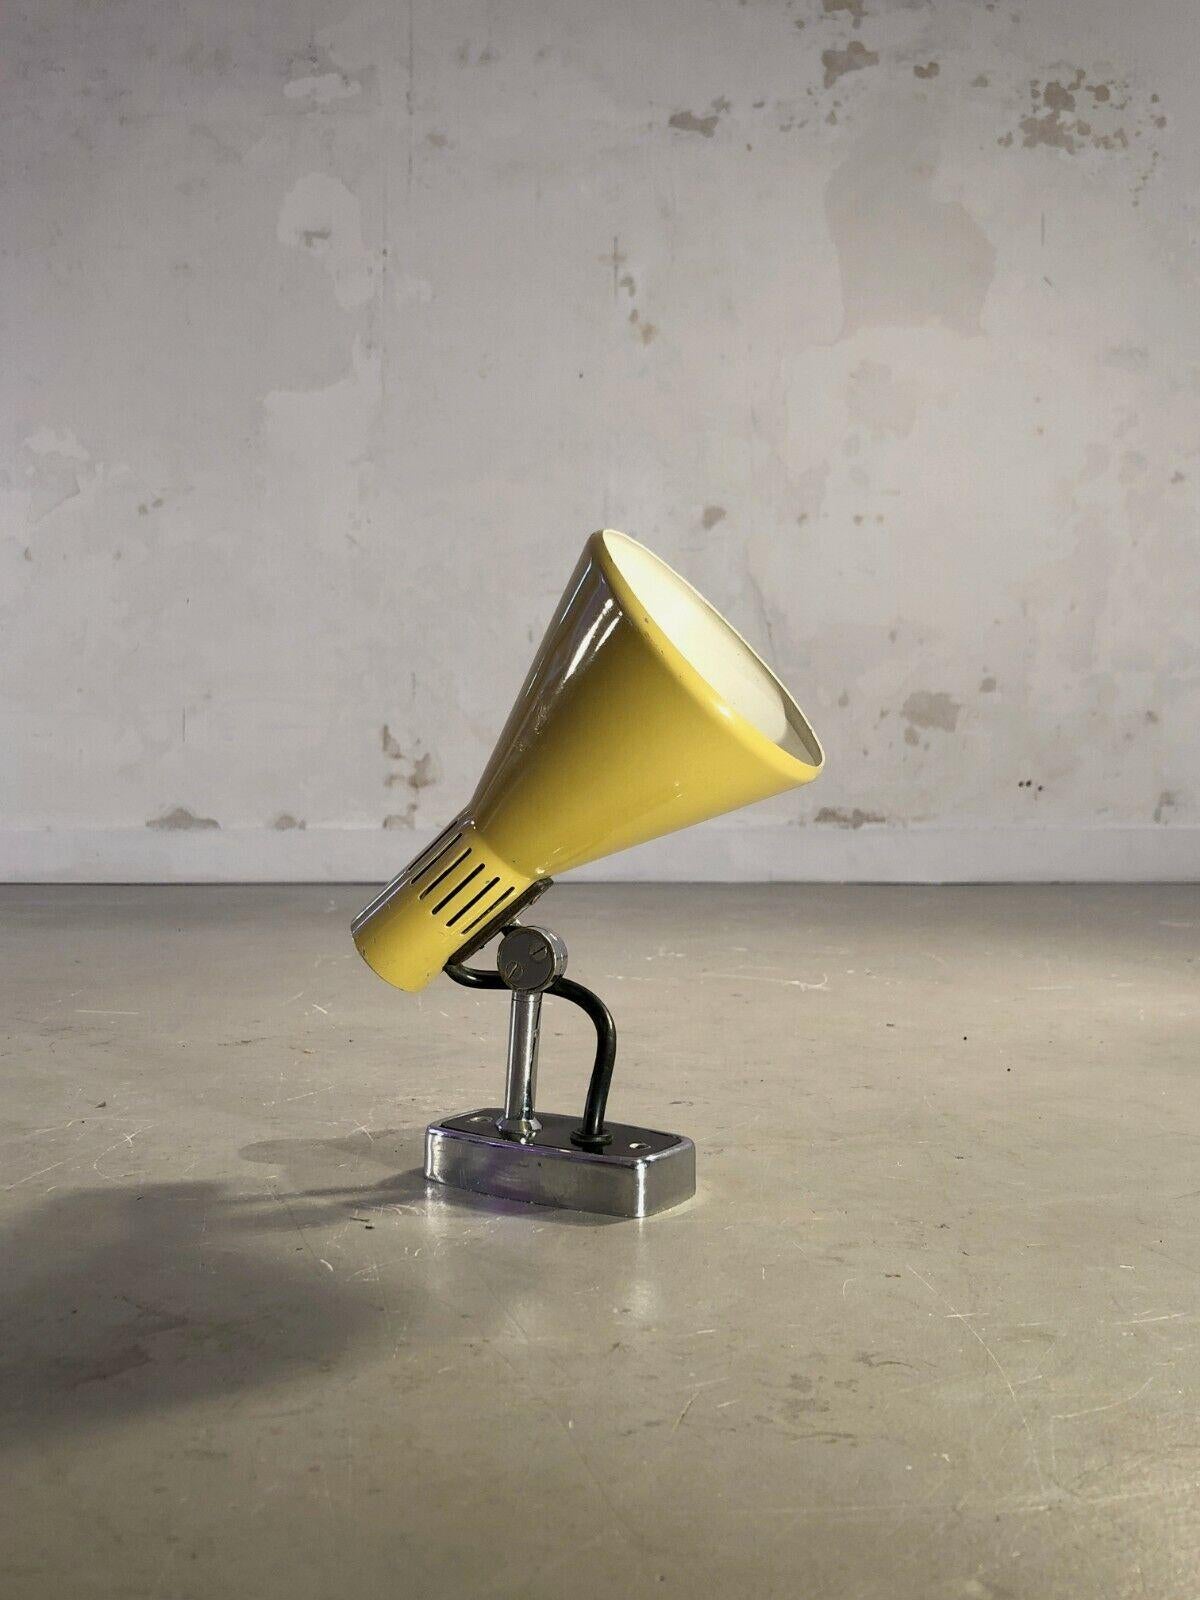 A small adjustable wall light, Modernist, from Forme-Libre, wall base in black lacquered metal enhanced with chrome, adjustable lampshade in pale yellow lacquered metal, model No. 286 by Bruno Gatta, Stilnovo edition, Italy 1960. Stilnovo Milano